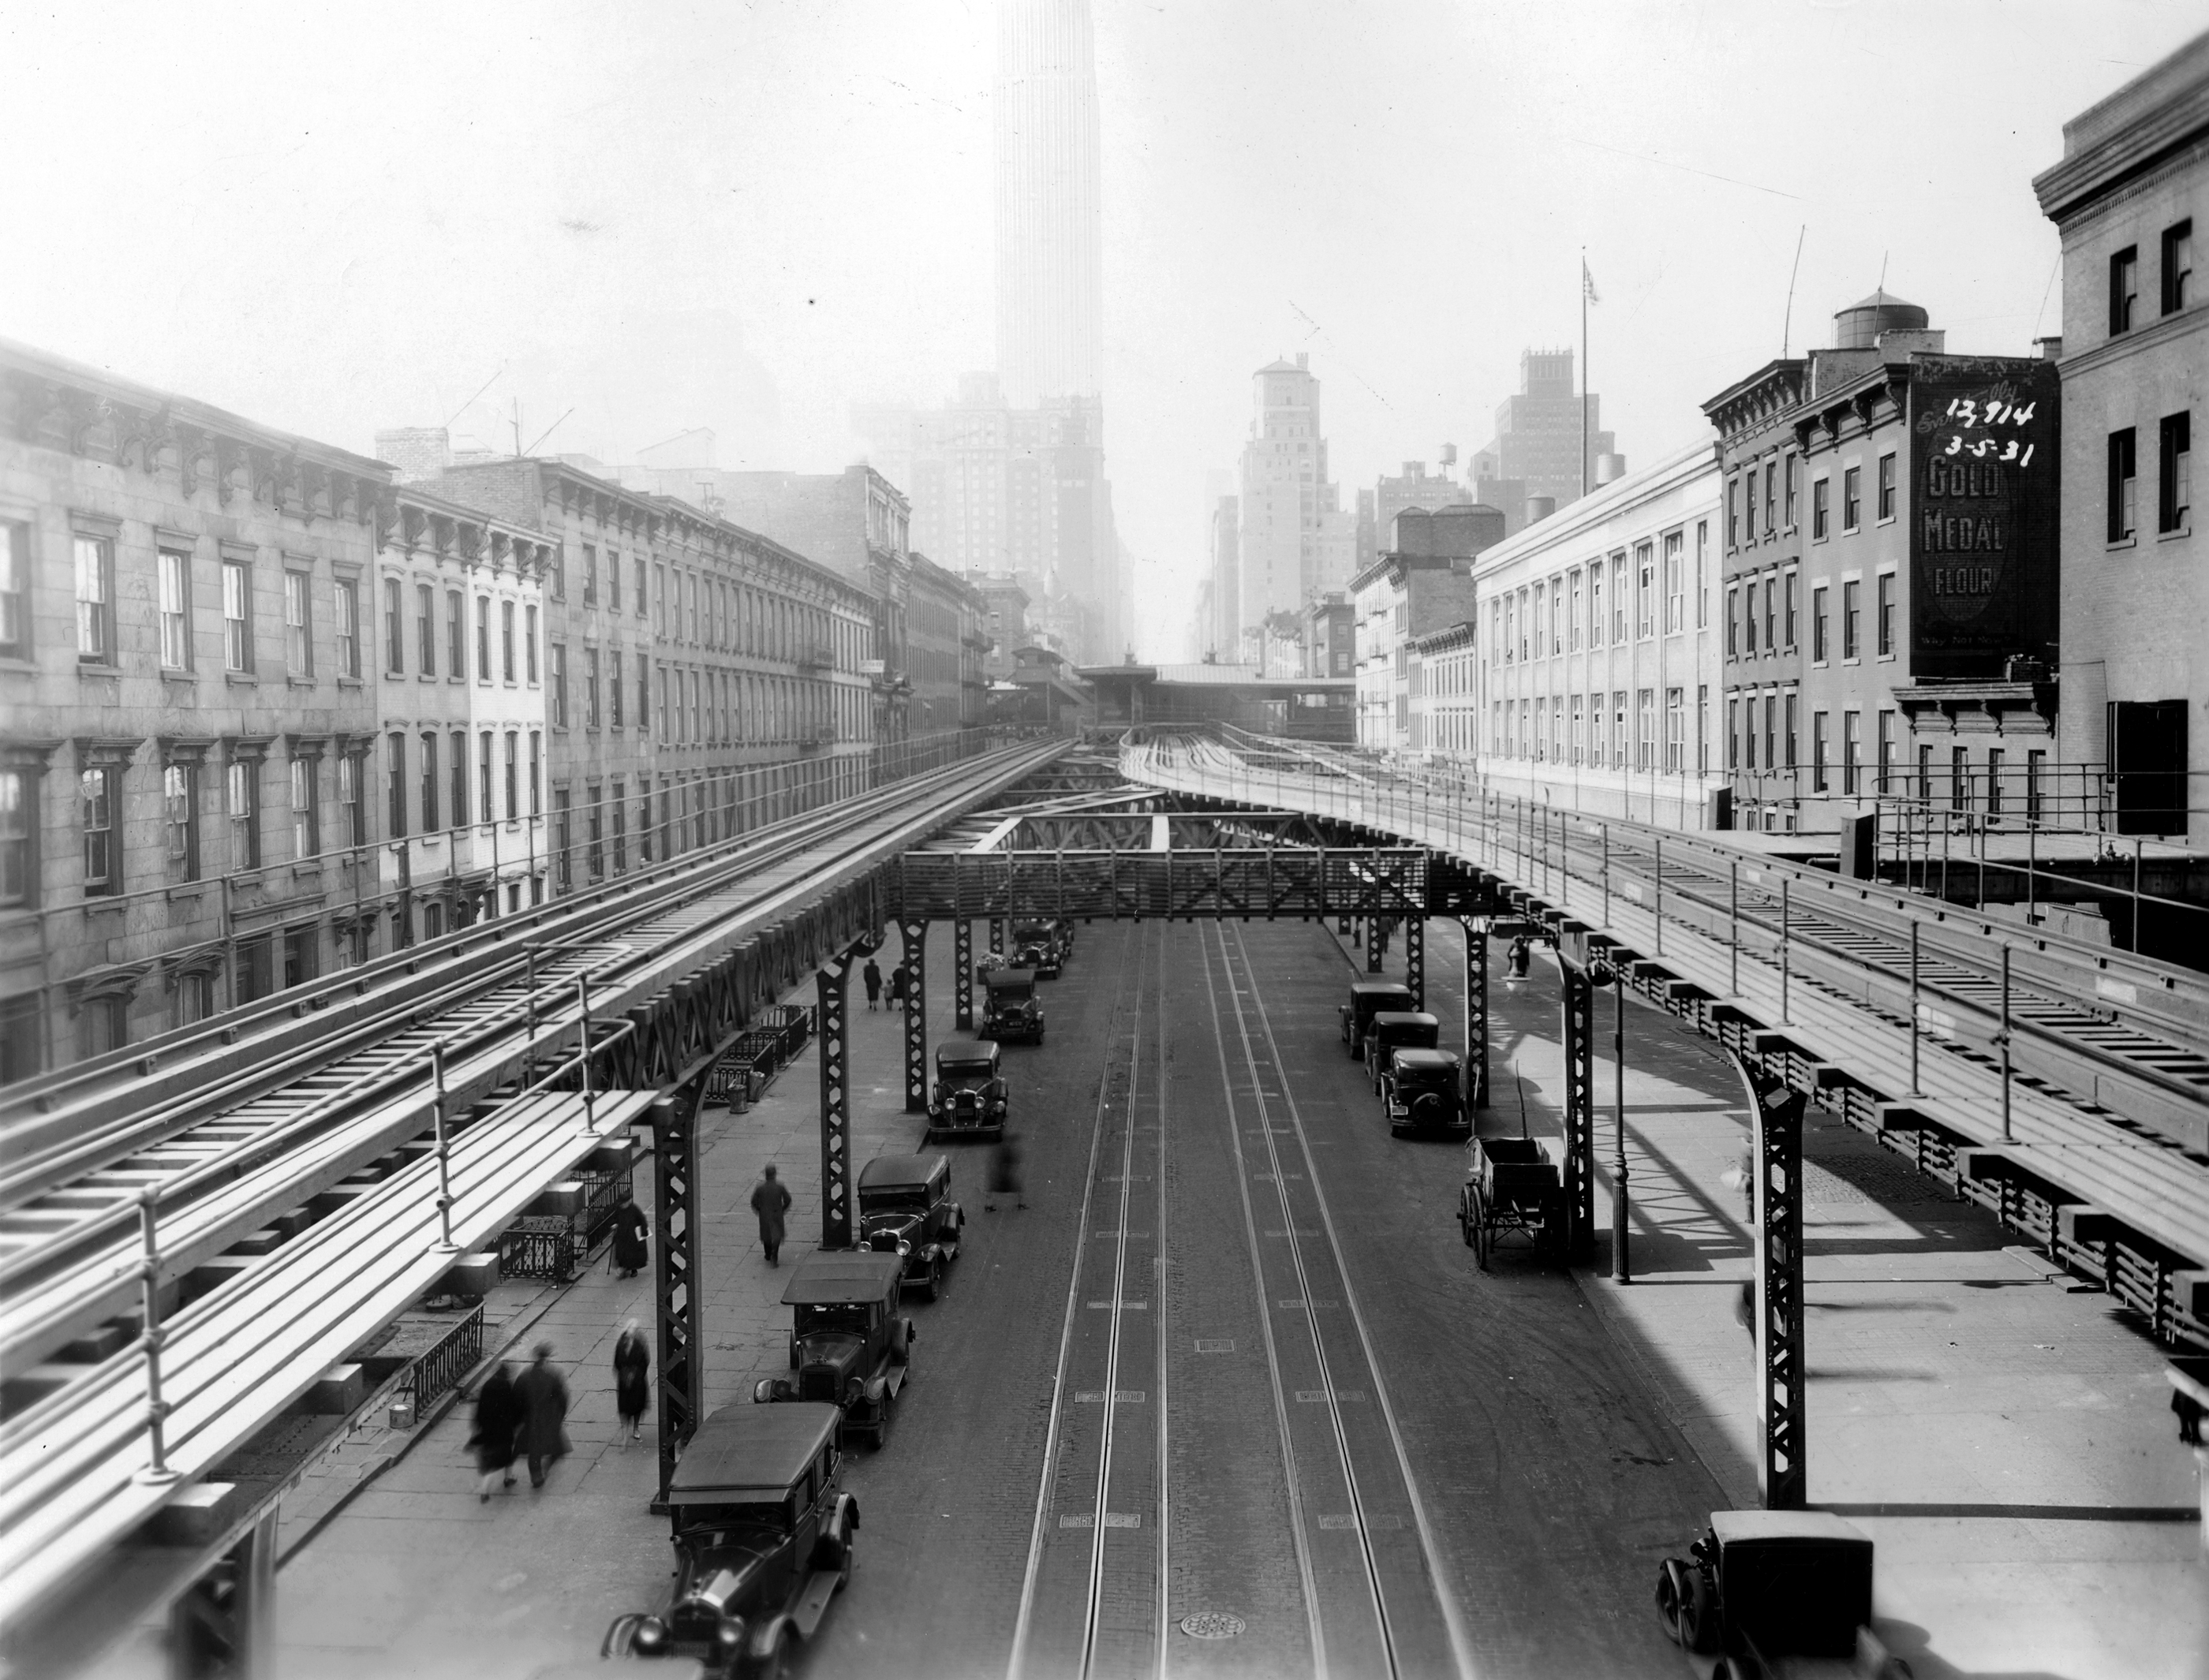 View of Third Avenue with elevated train structures visible